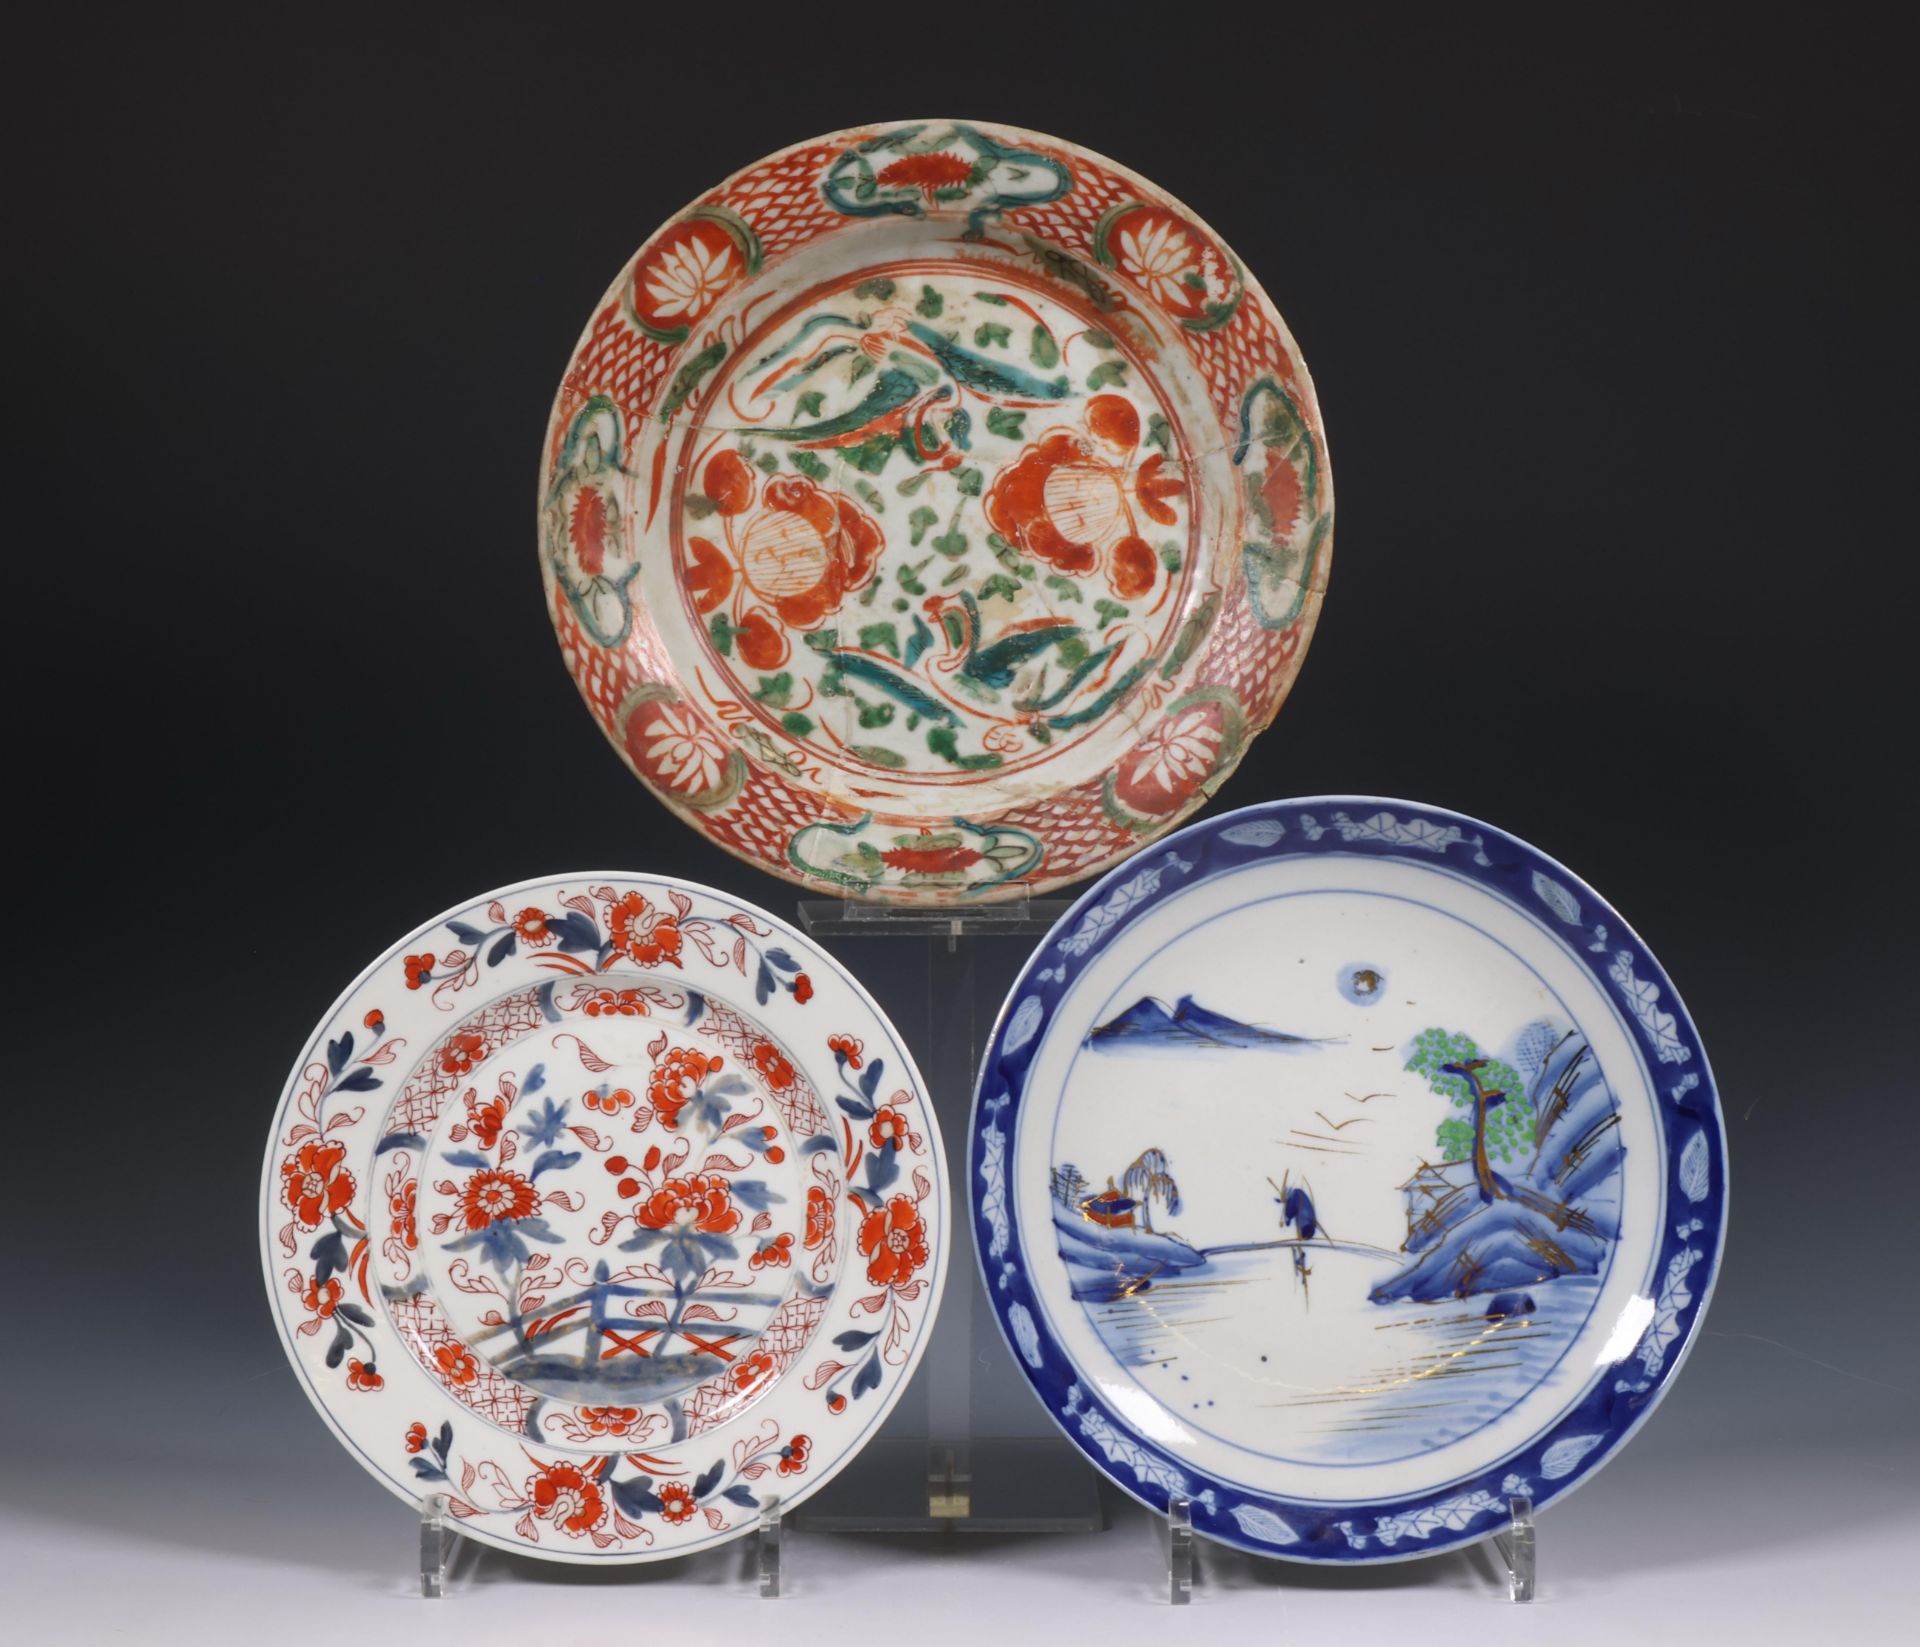 China and Japan, collection of various porcelain plates, 17th century and later, - Image 3 of 4